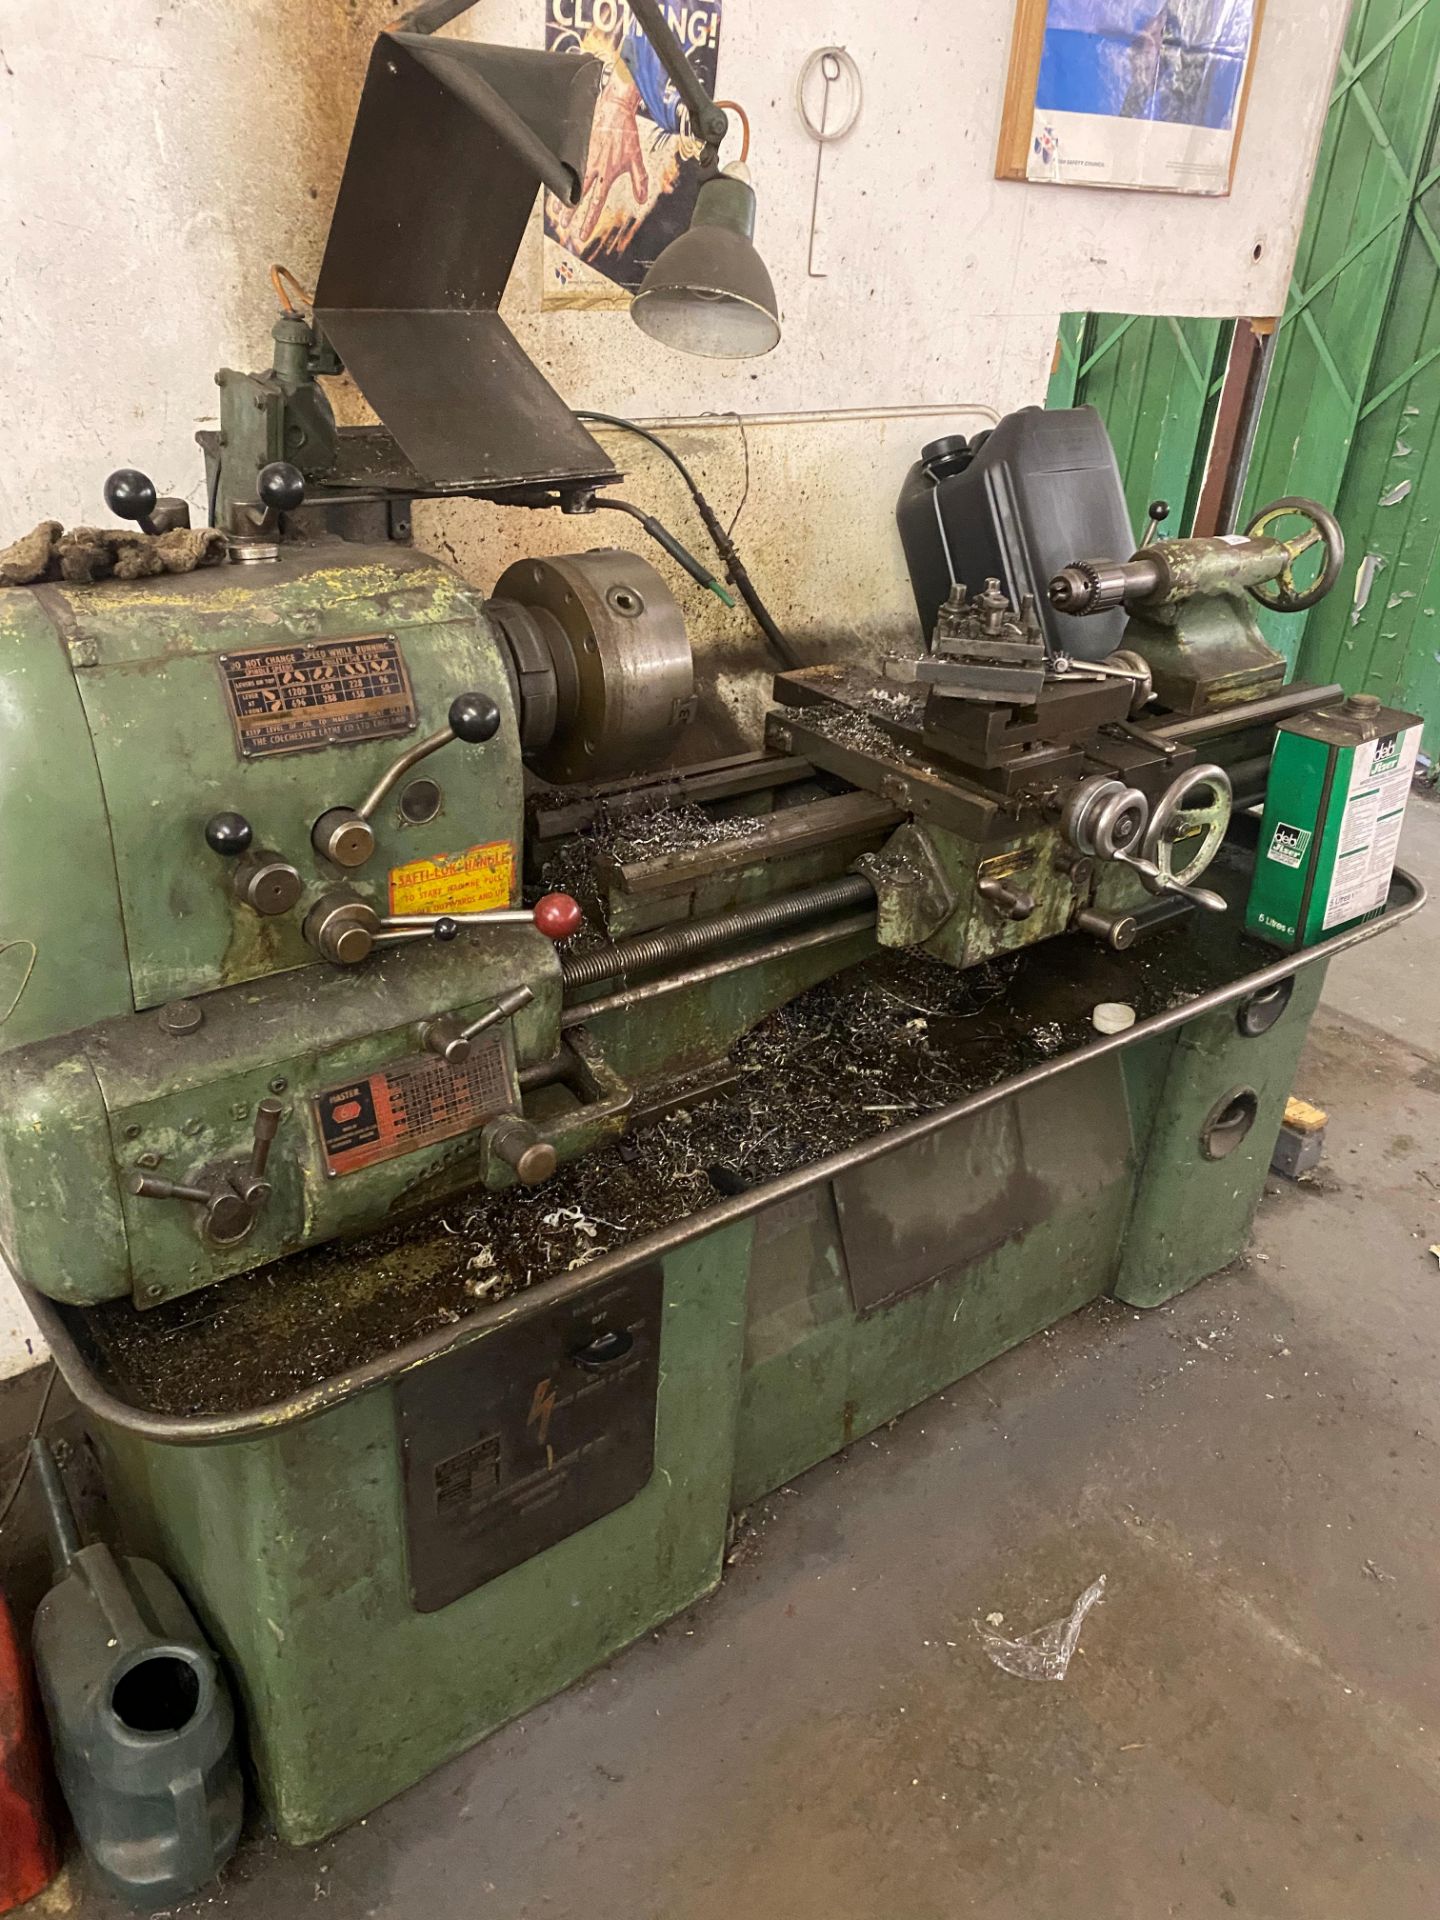 1 x Master 6 1/2" Lathe Manufactured By The Colchester Lathe Company - Ref: C2C043 - CL789 - - Image 8 of 8